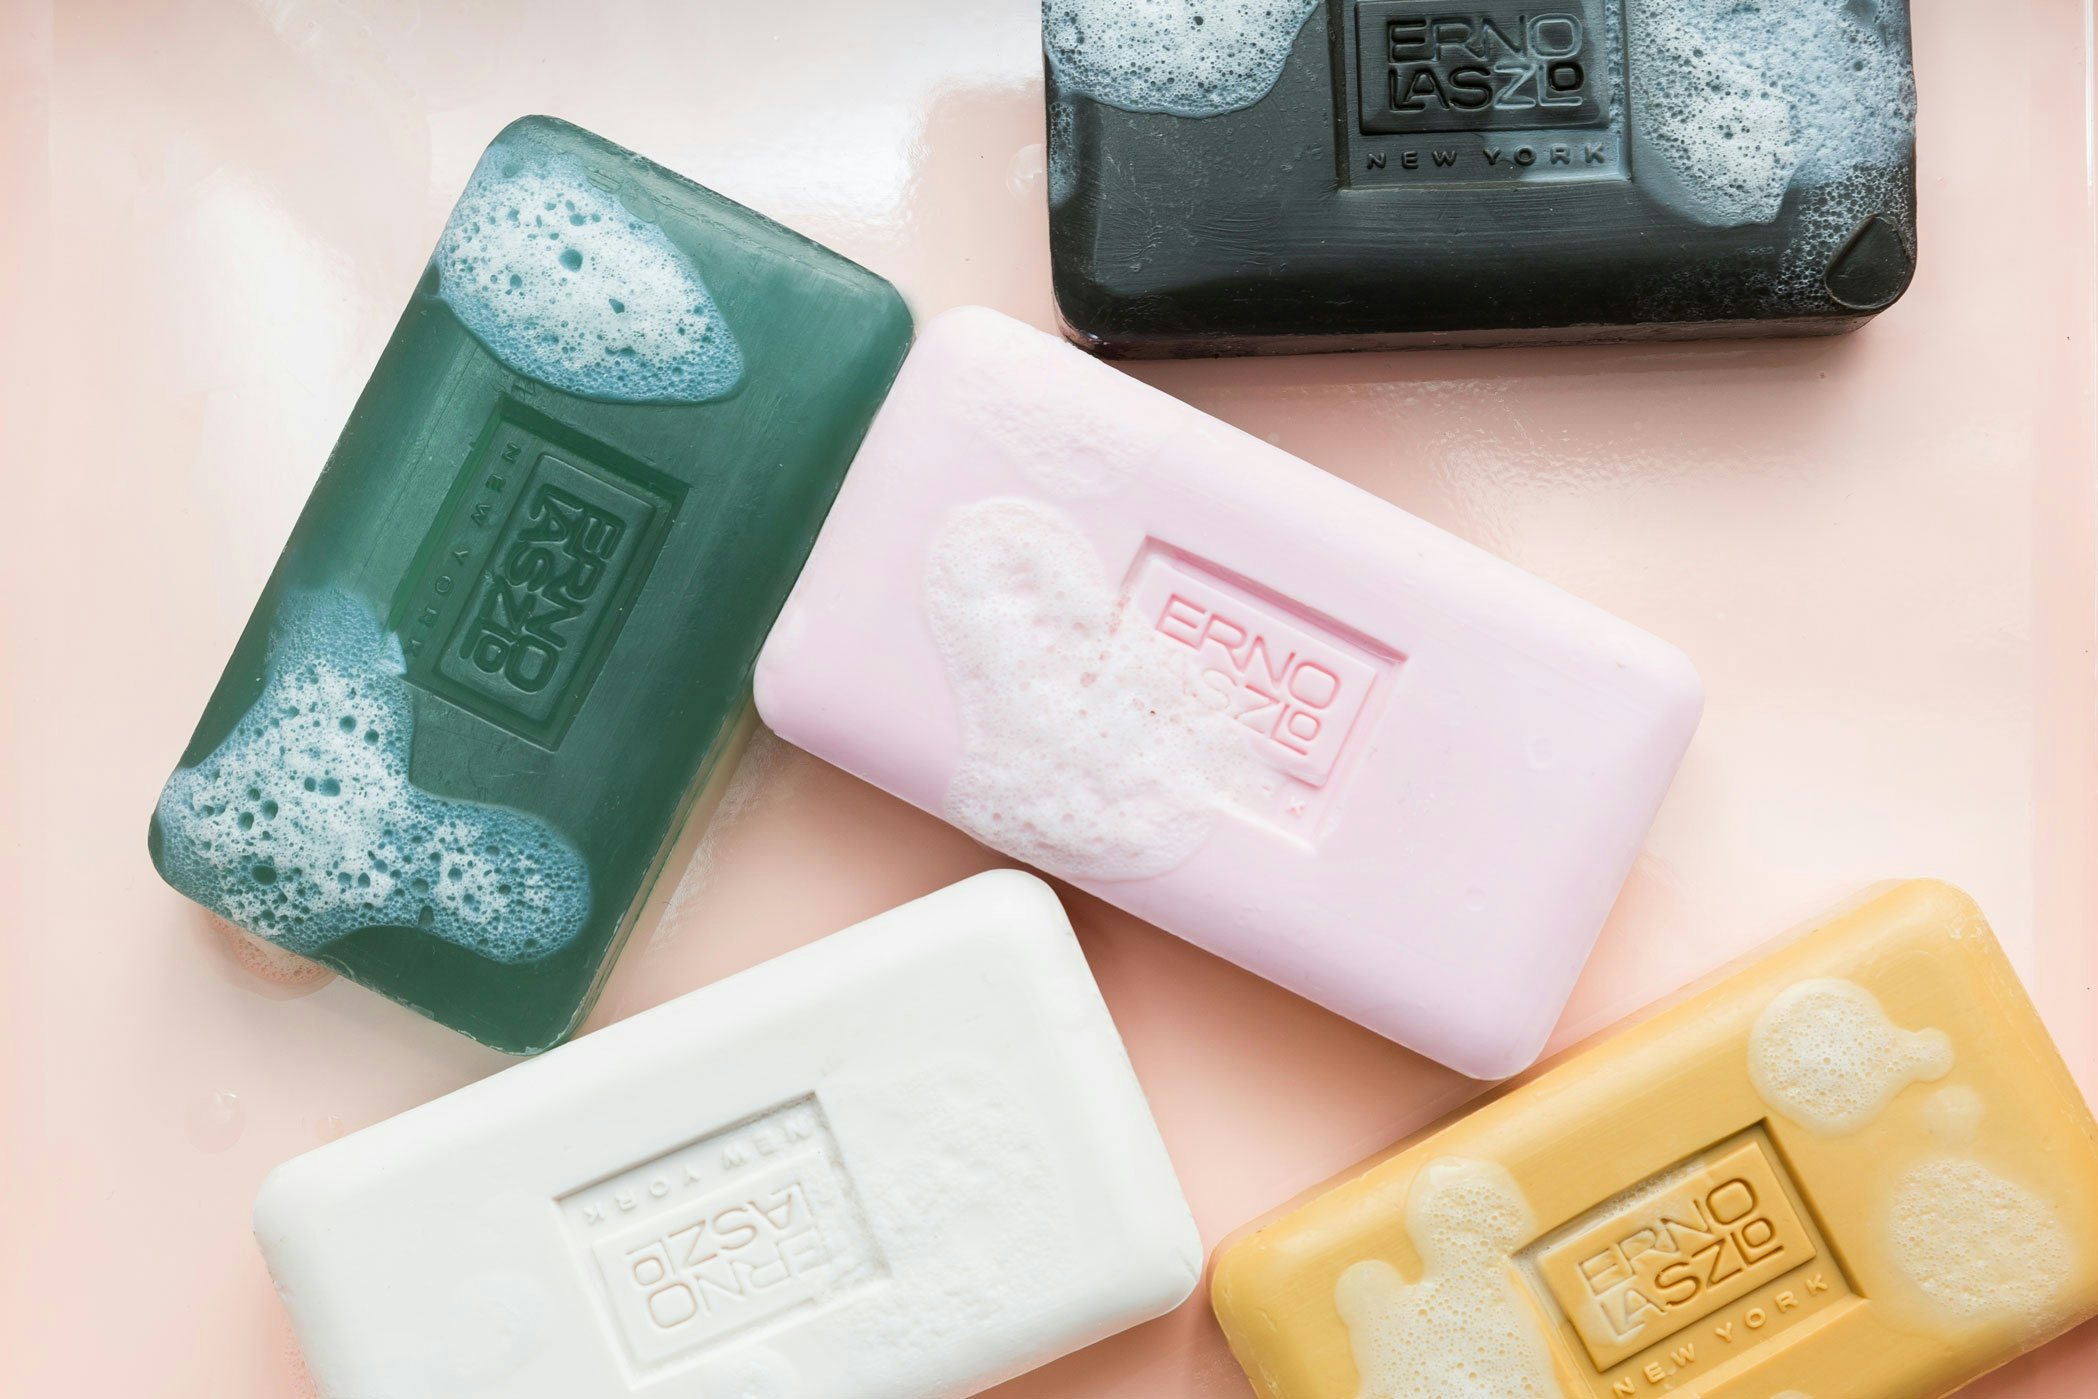 Erno Laszlo’s CEO Charles Denton plans to grow the New York-based skincare brand into a 1 billion yuan brand within five years. Courtesy photo